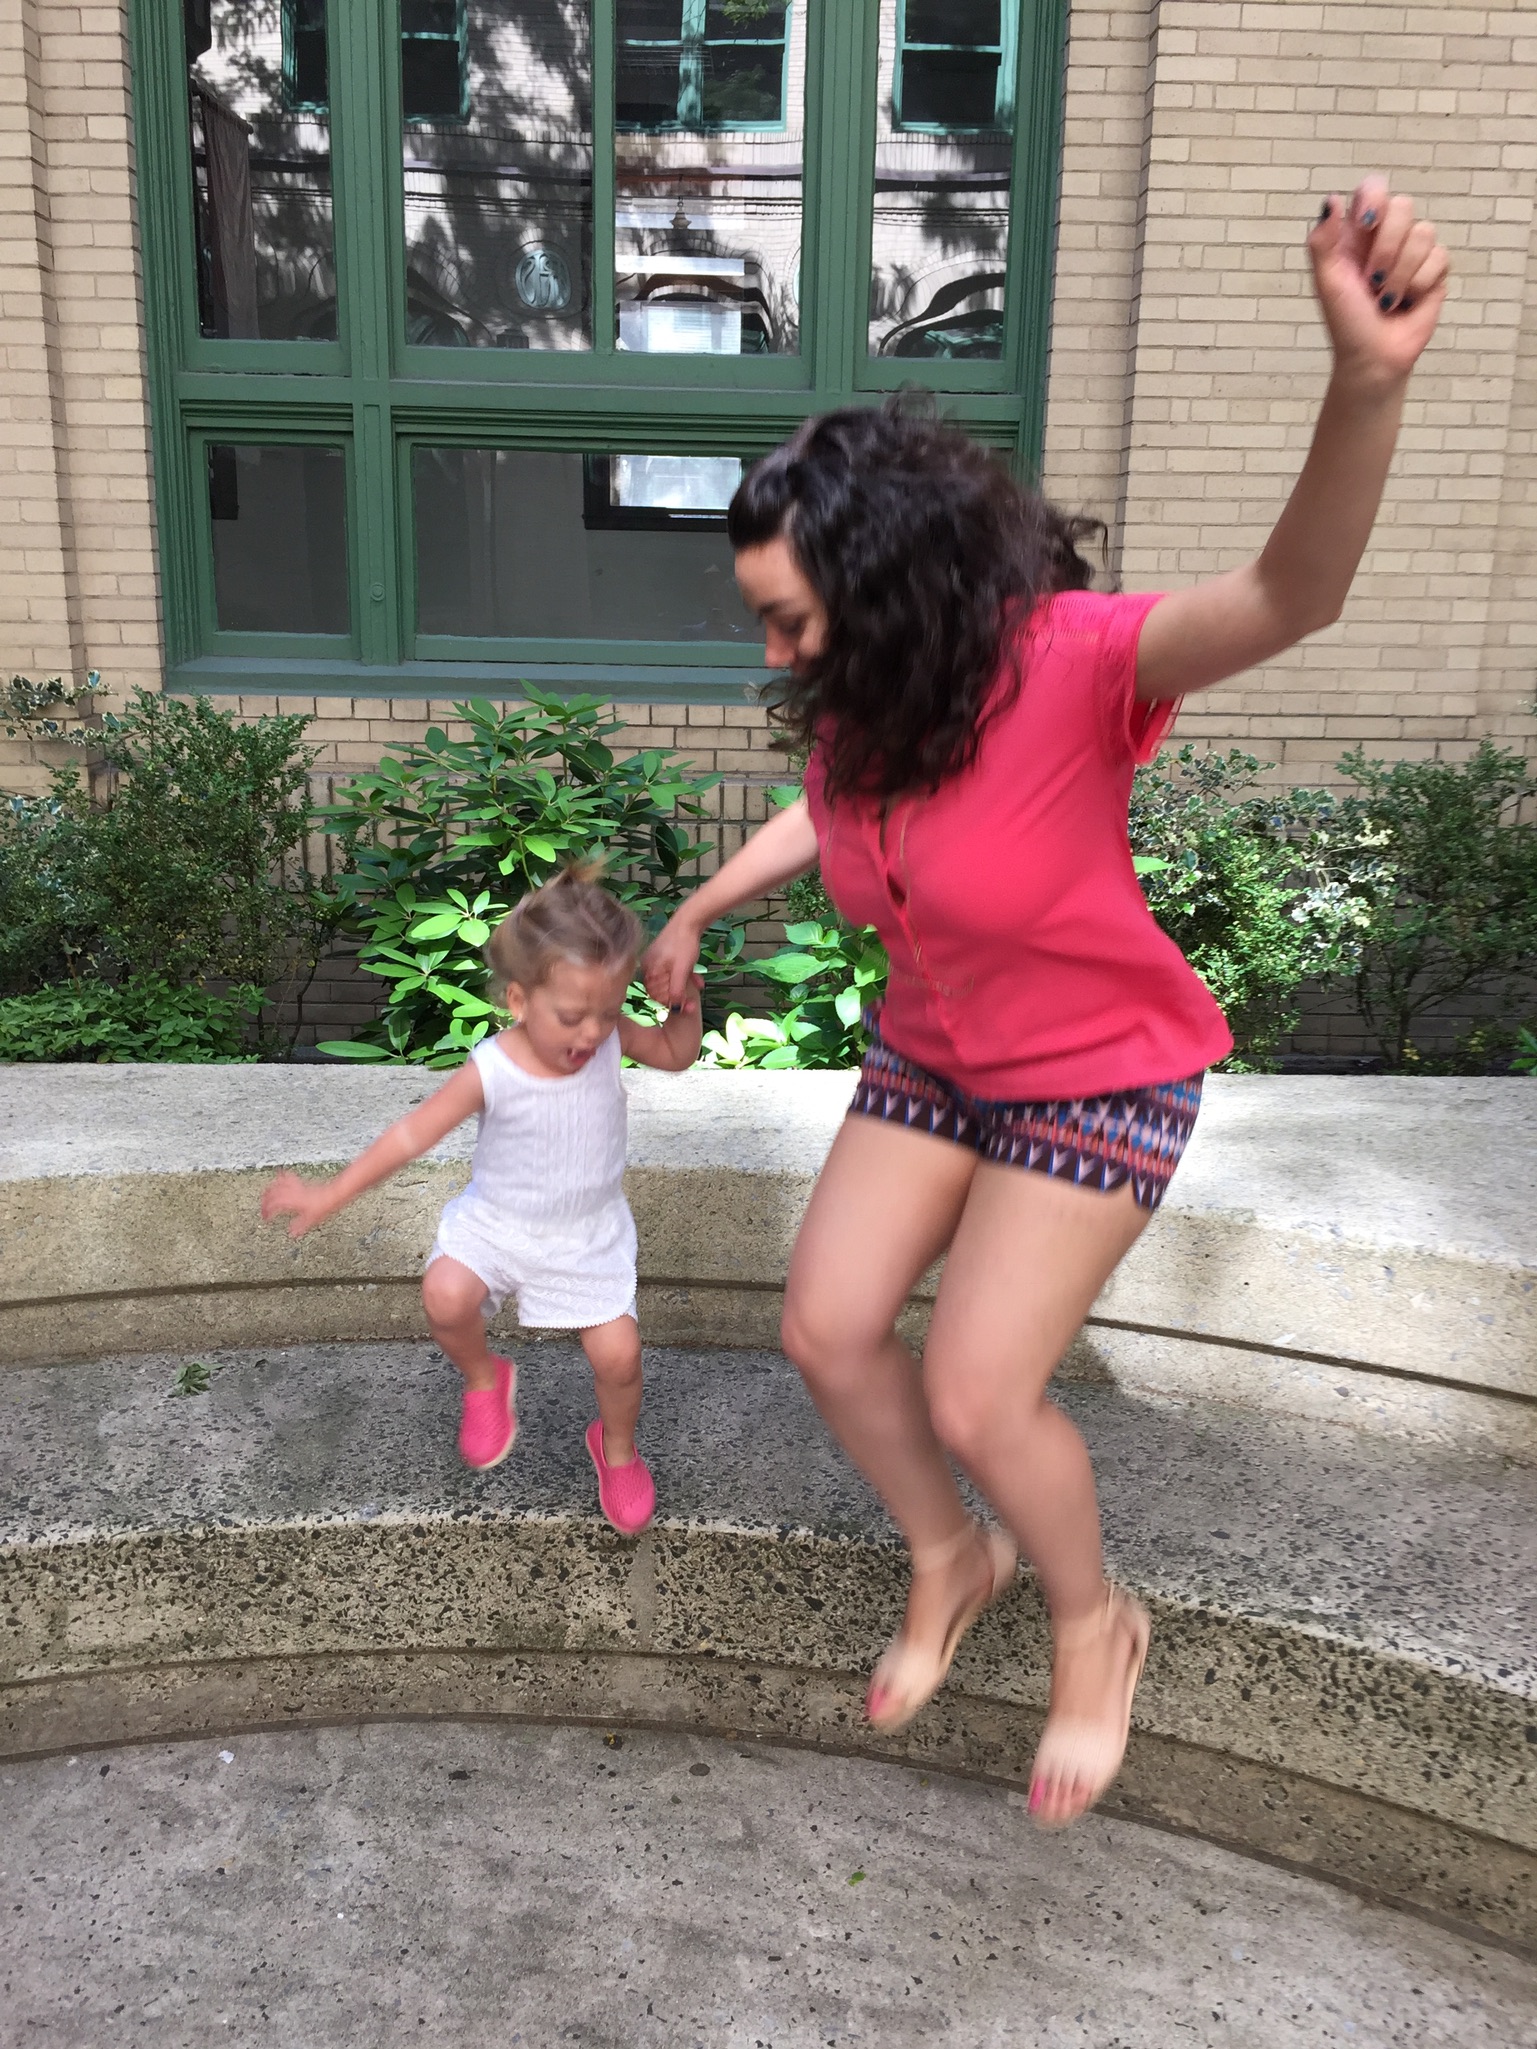  Playing in the courtyard at church 